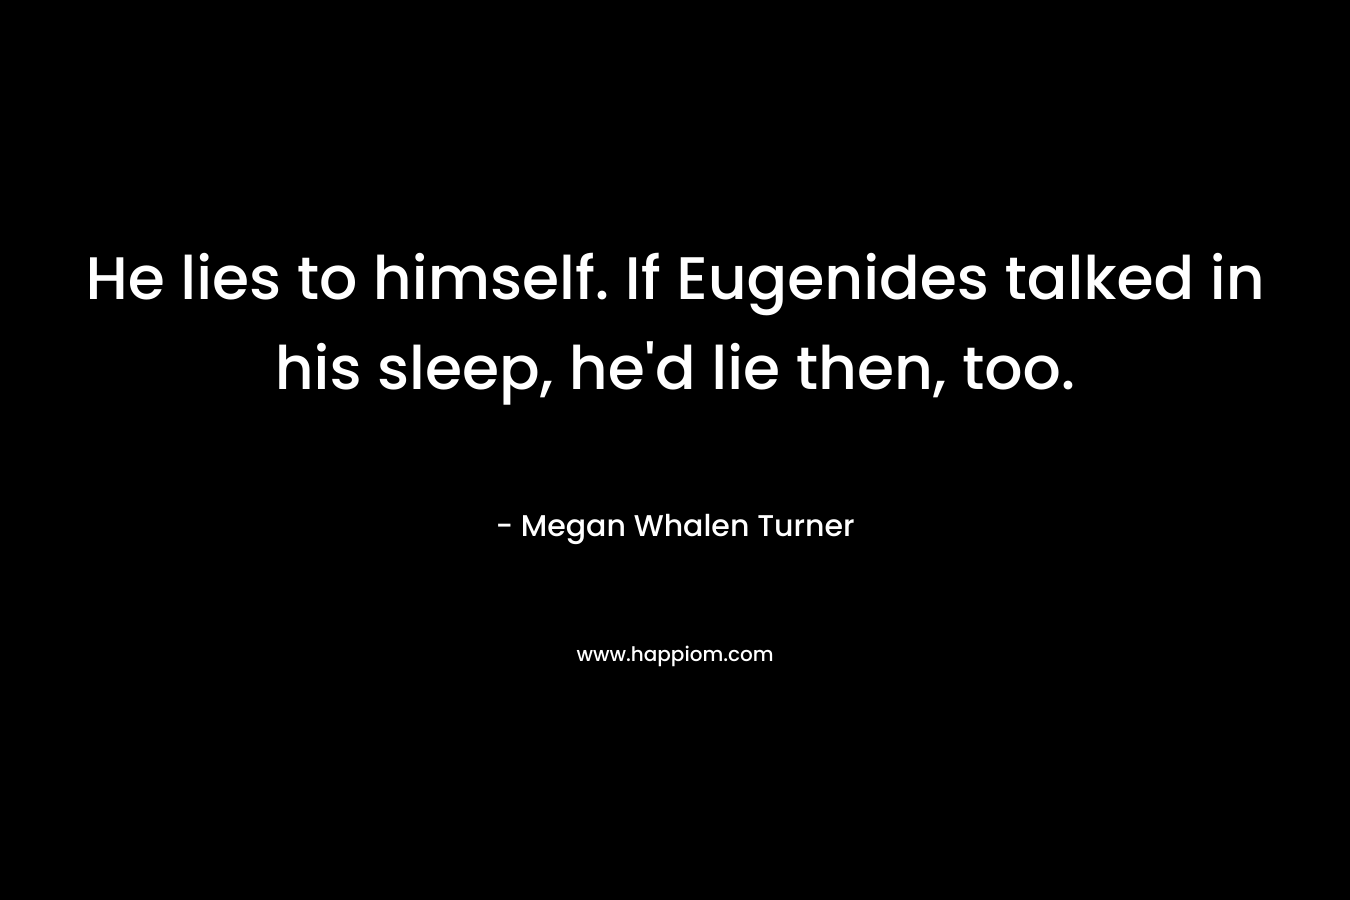 He lies to himself. If Eugenides talked in his sleep, he’d lie then, too. – Megan Whalen Turner